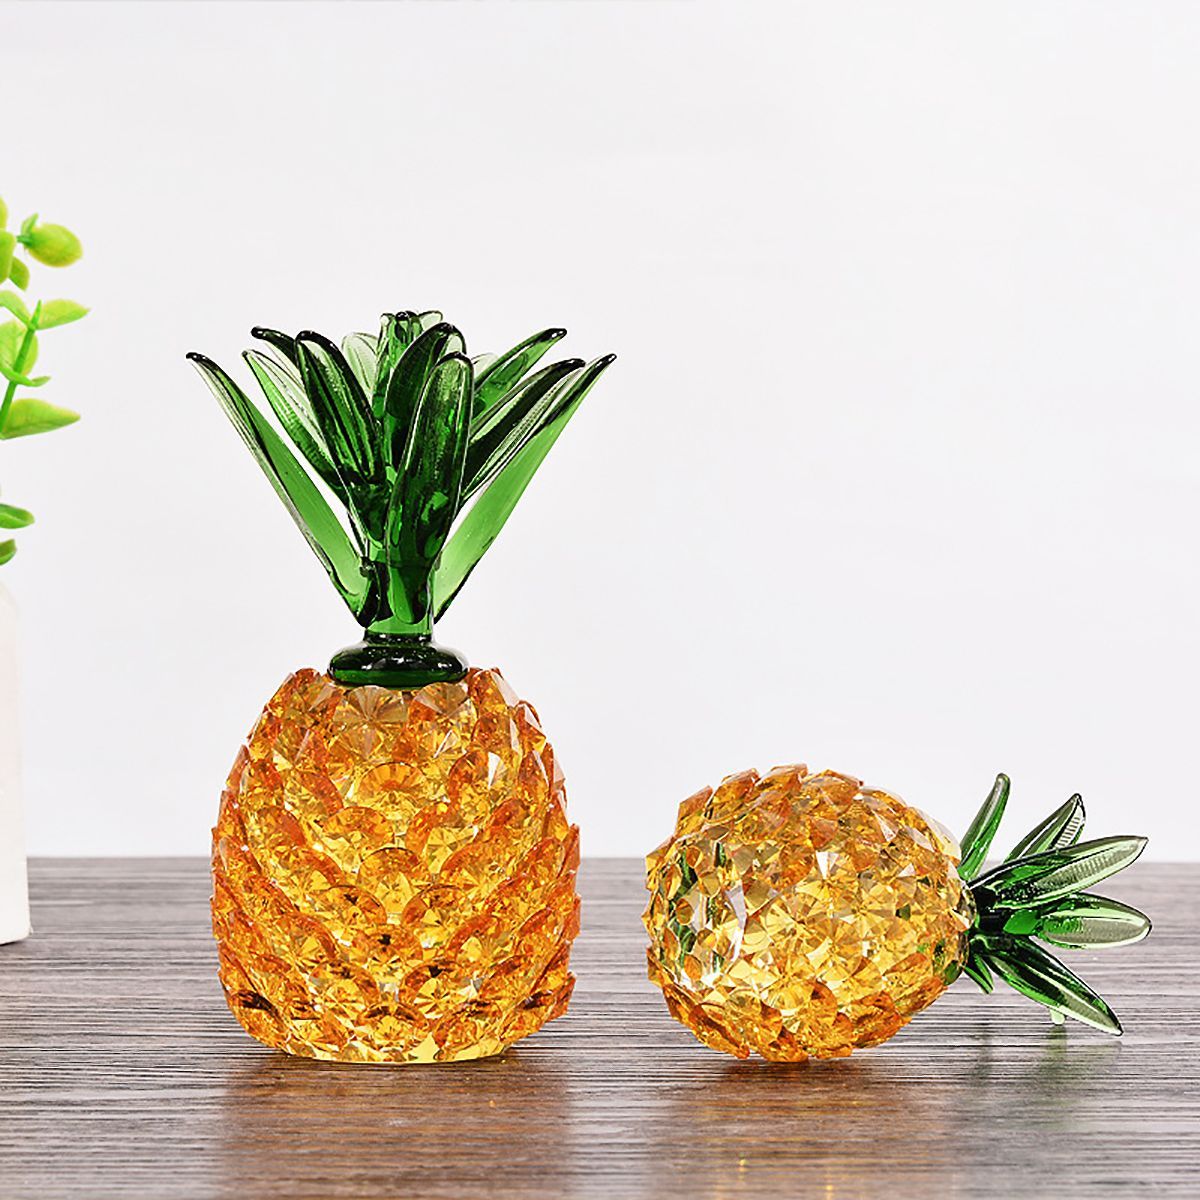 Crystal-Glass-Pineapple-Figurine-Hand-Craft-Gold-Paperweight-Ornament-Gift-Decorations-1583885